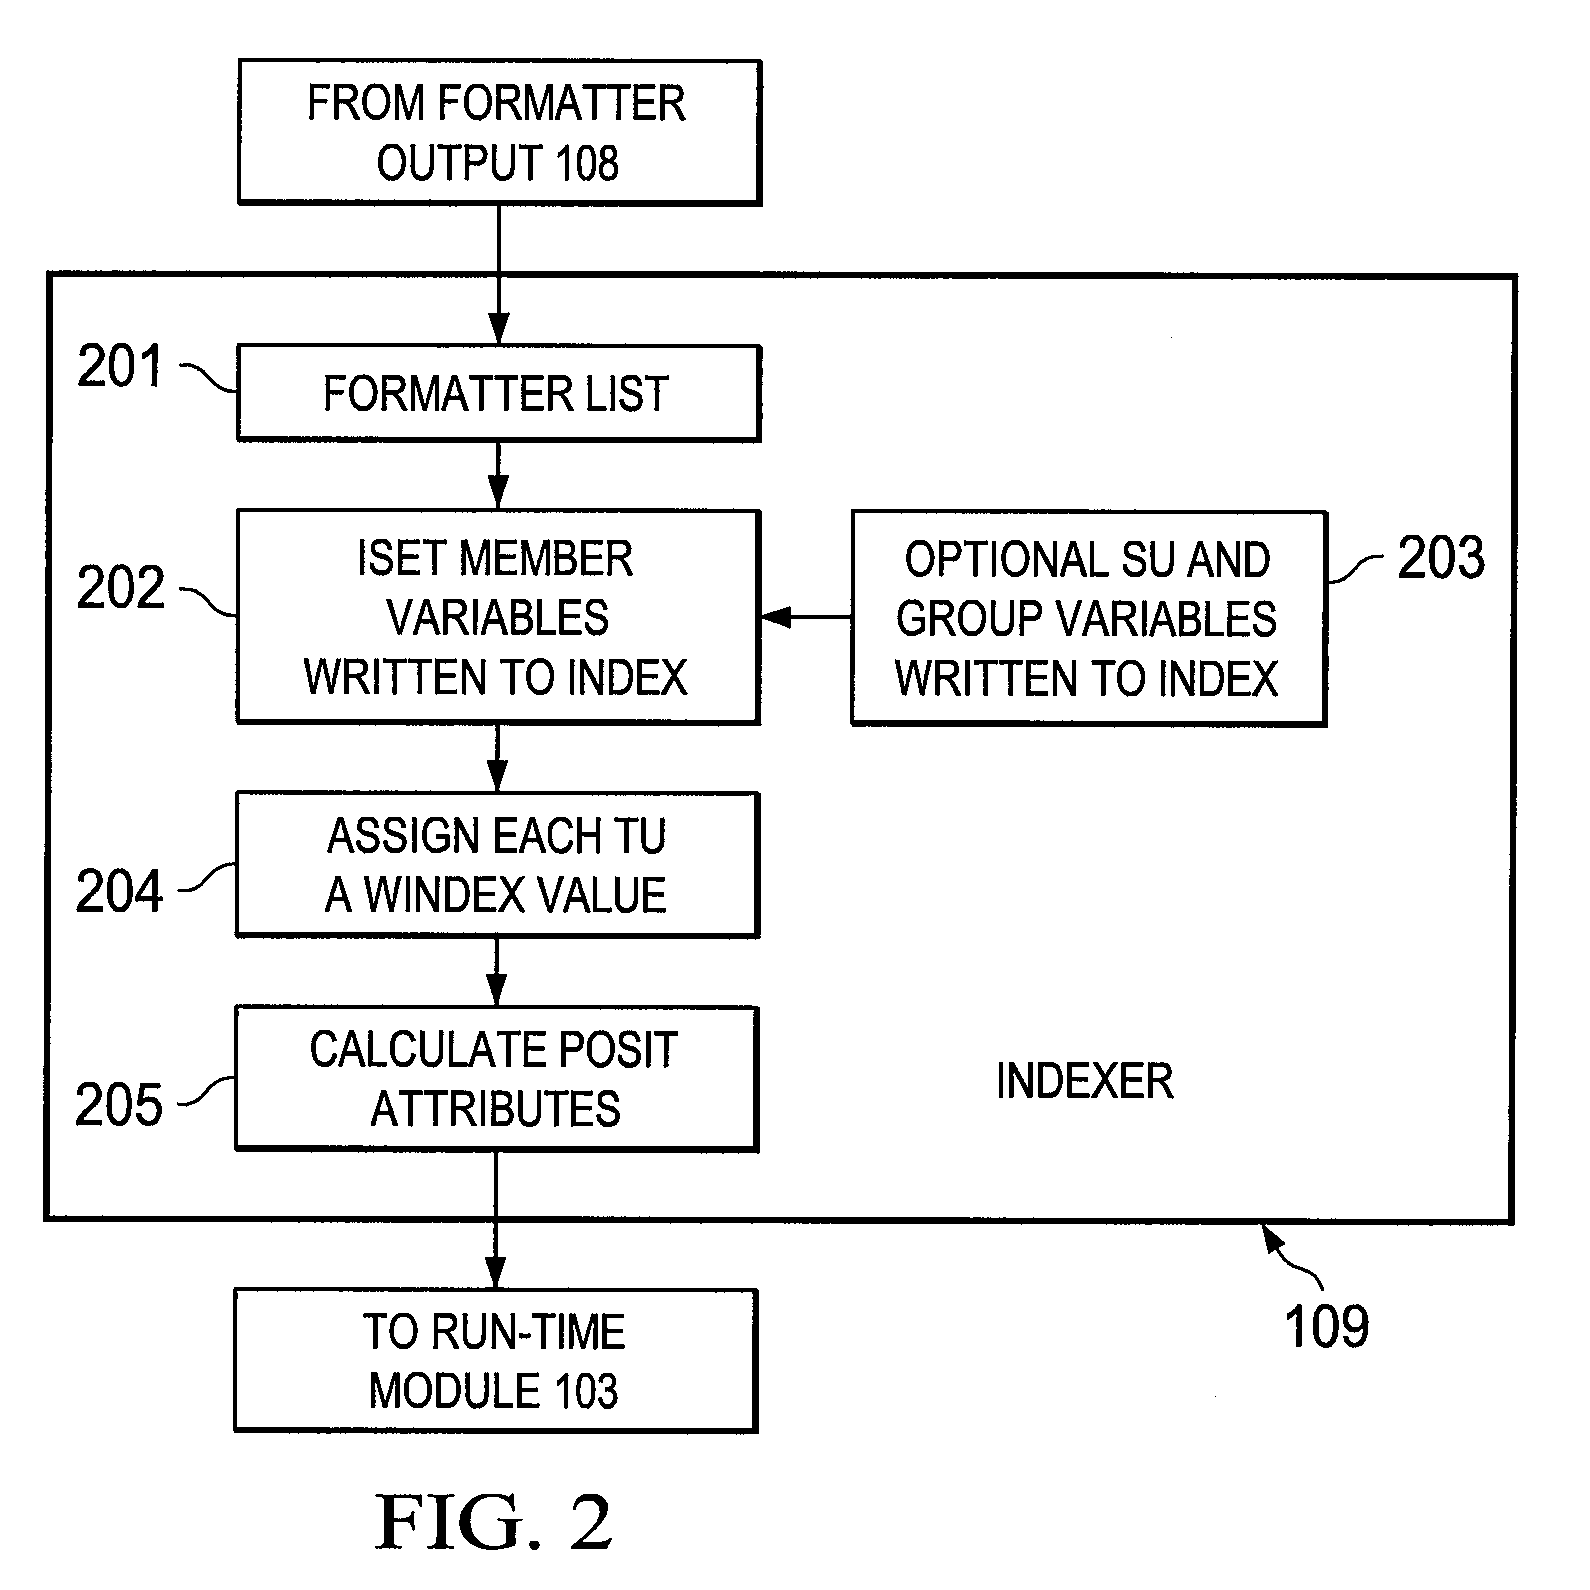 Systems and methods for a search engine having runtime components